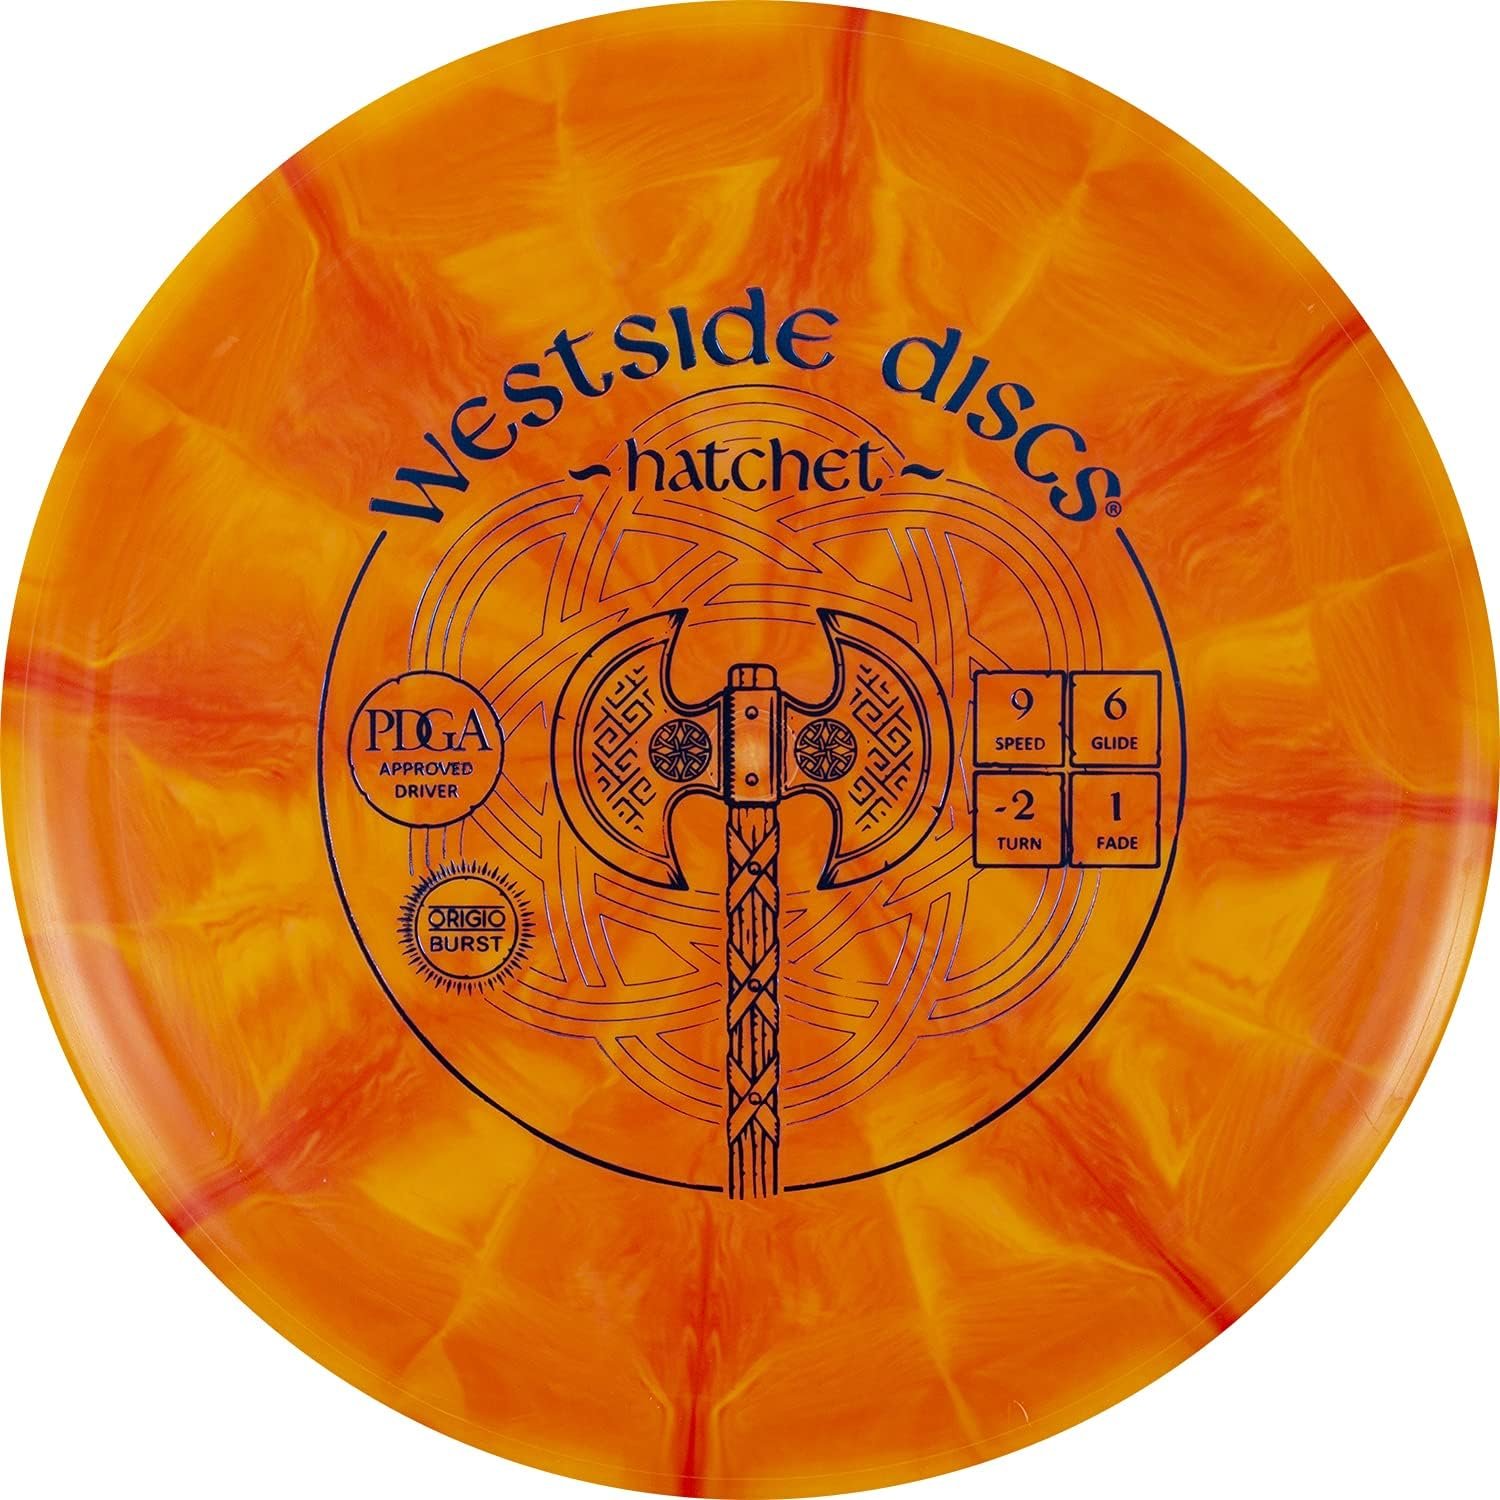 Westside Discs Origio Burst Hatchet Fairway Disc Golf Driver | Great for Beginners | Easy to Throw Frisbee Golf Disc | 170g Plus | Stamp Color and Burst Pattern Will Vary